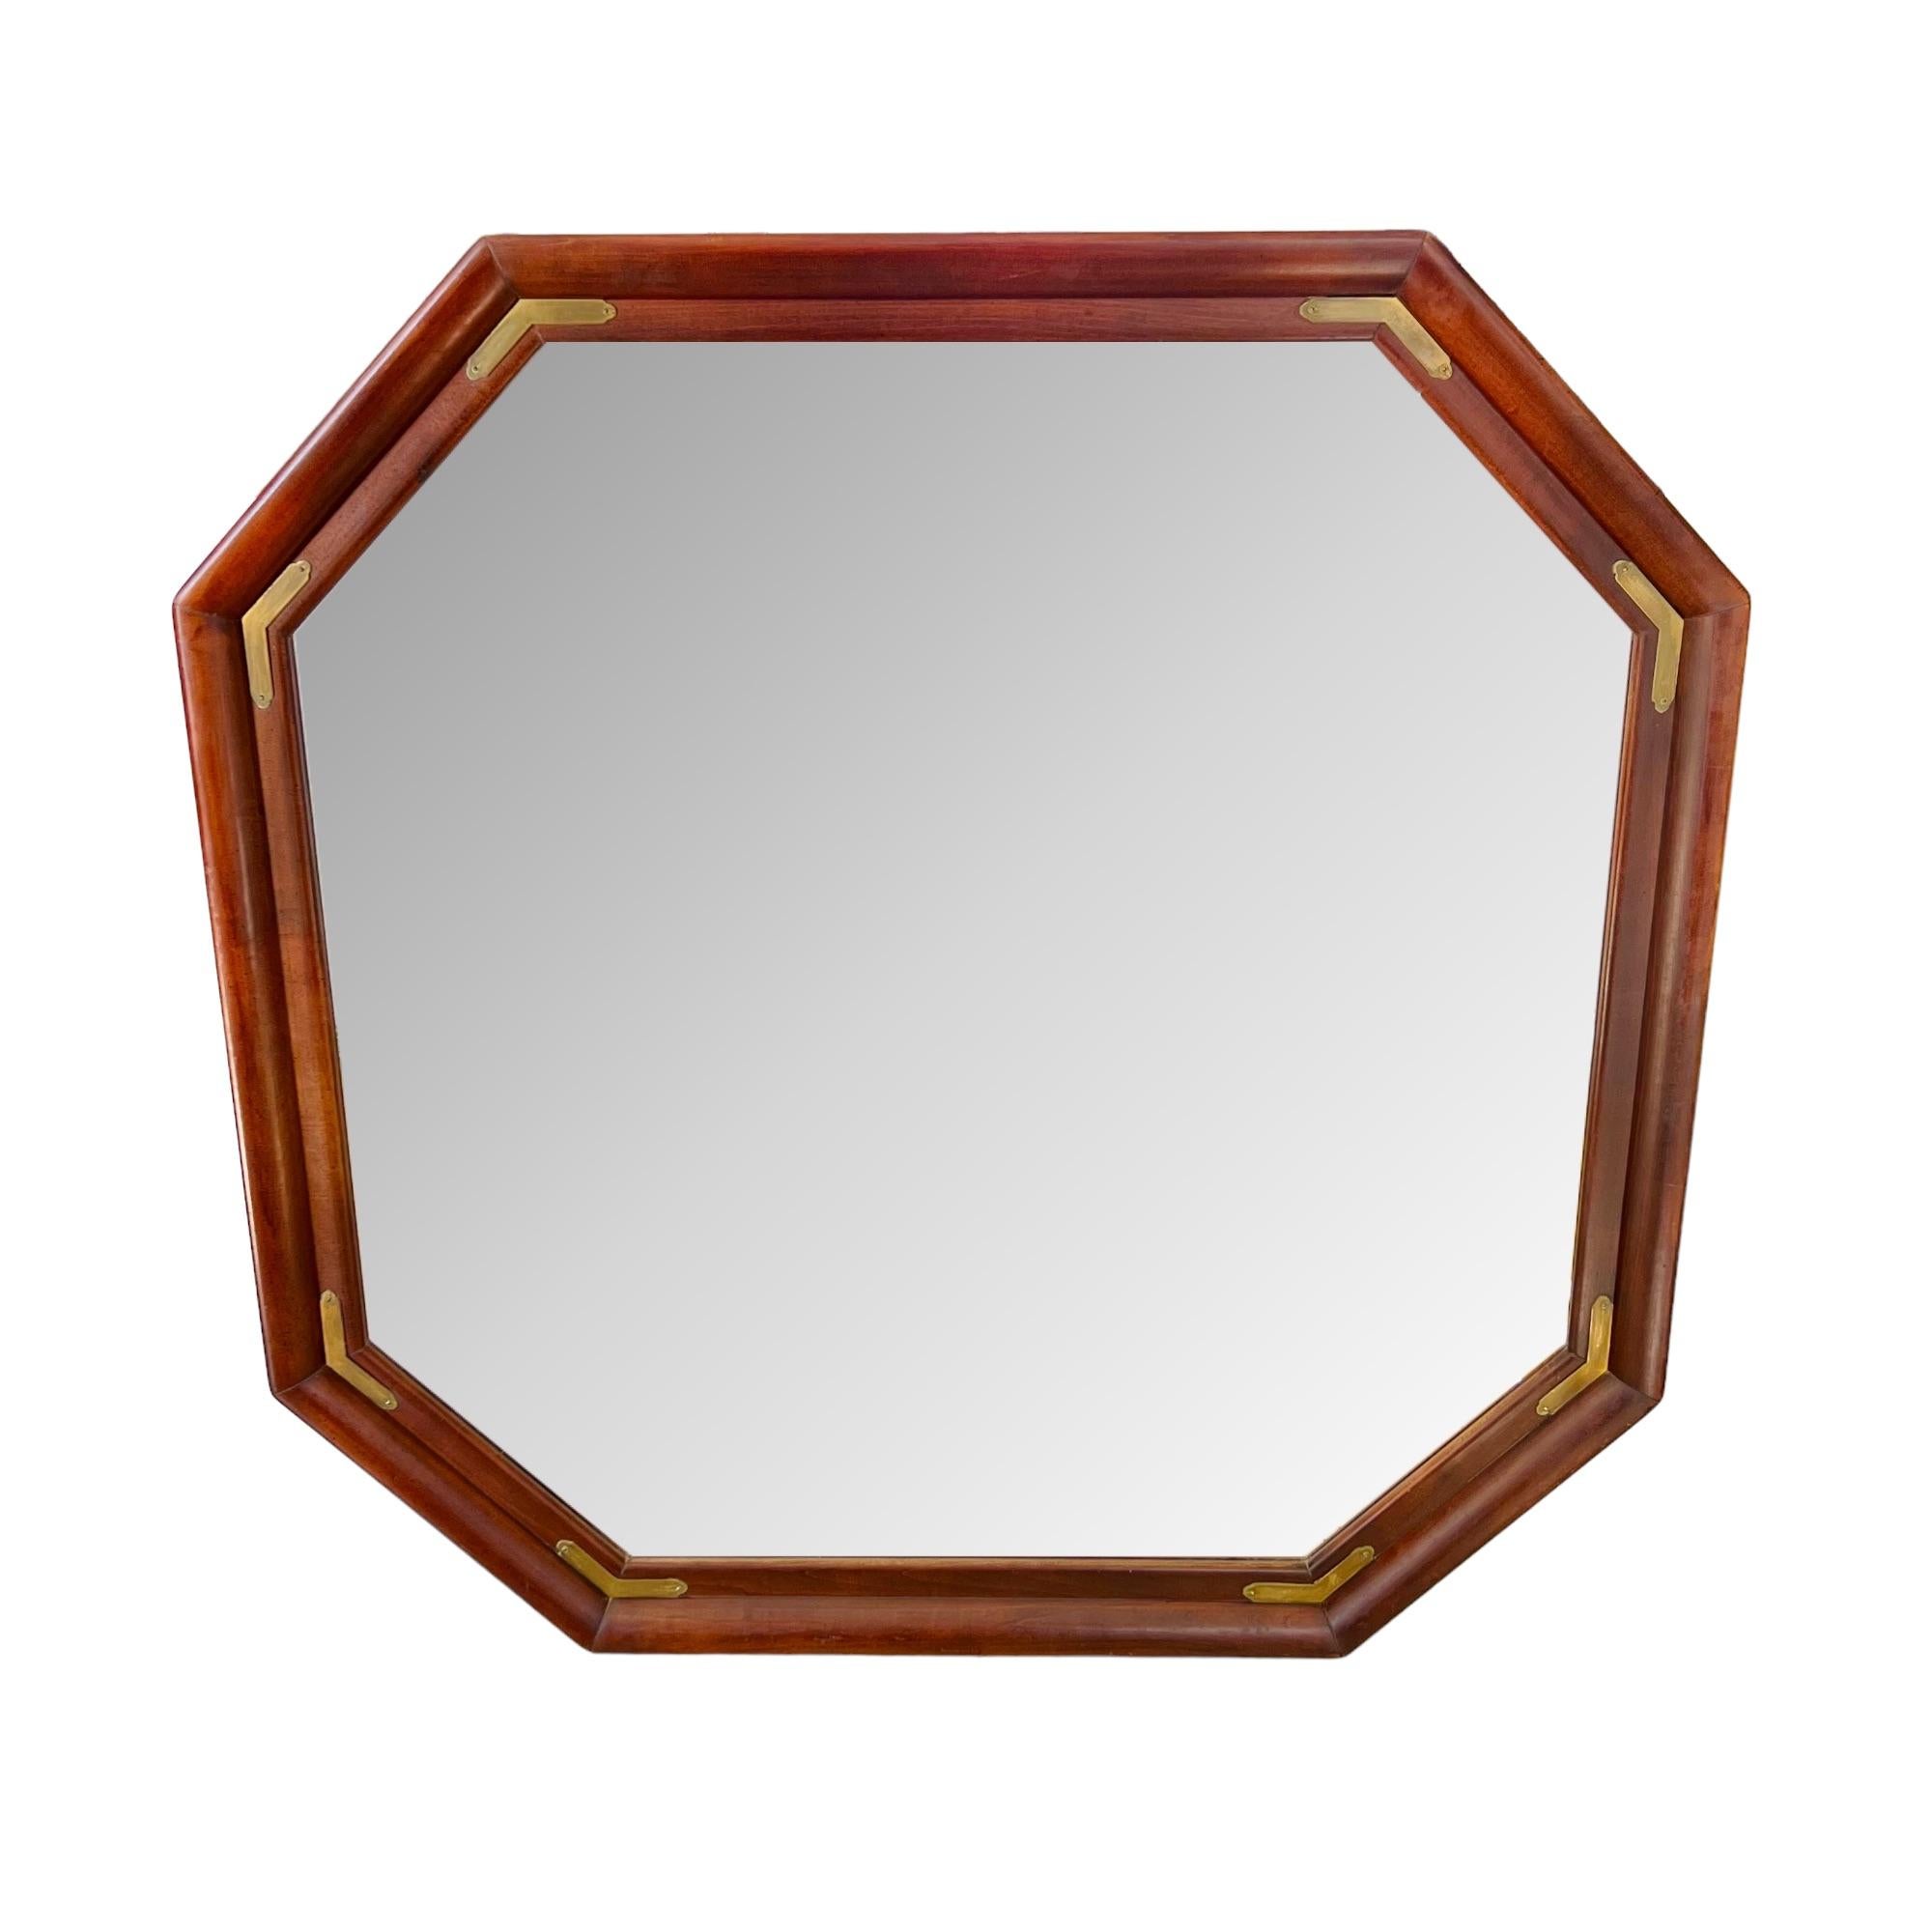 A large vintage campaign style octagonal beveled wall mirror. Wood frame with brass details.

Dimensions: 43